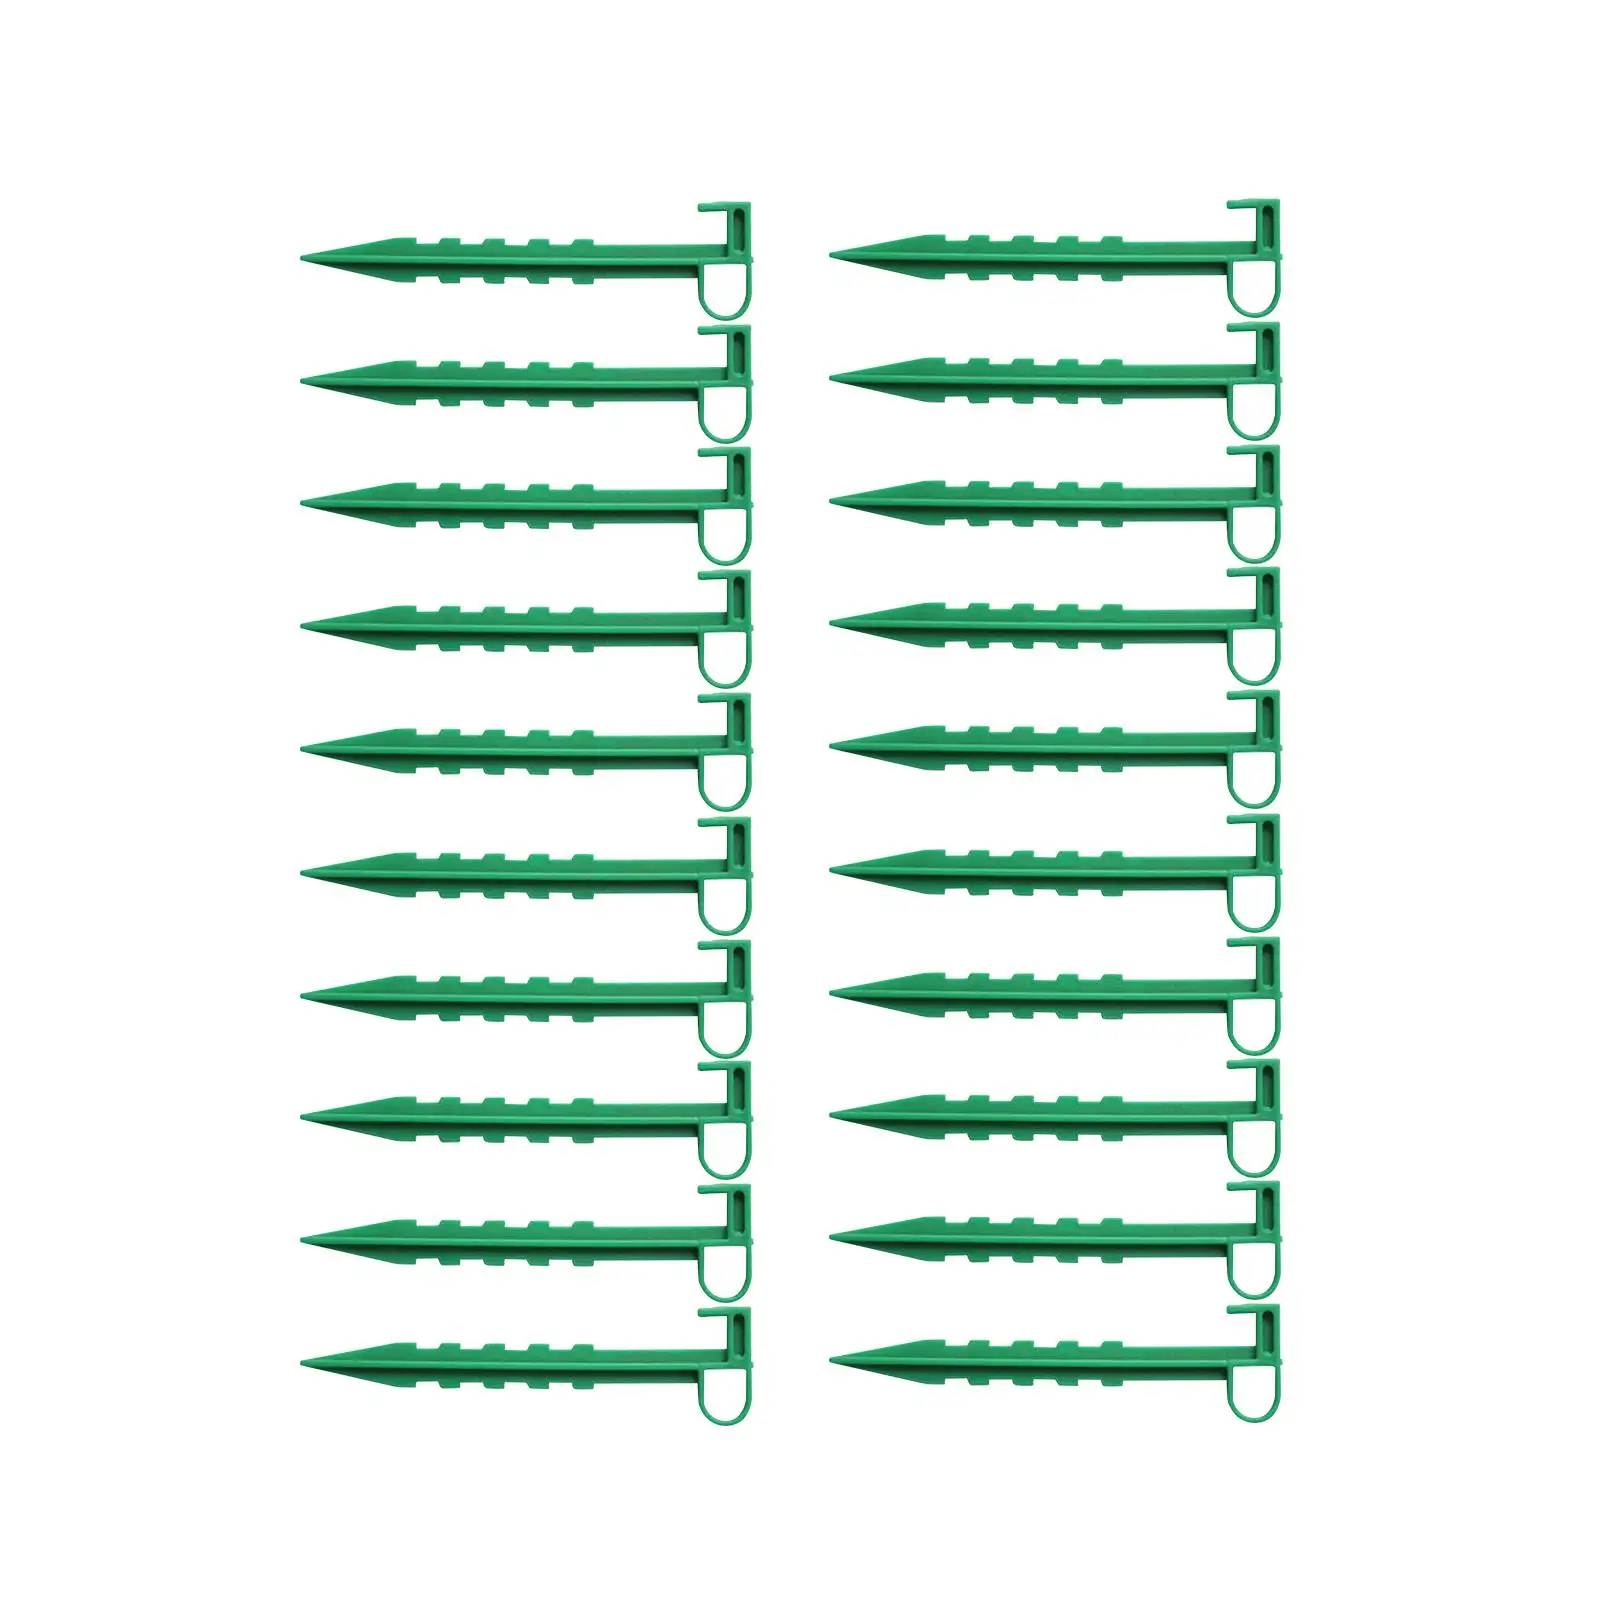 20x Garden Stakes Yard Fixed Fences Landscape Nails Anchor Fixing Anchor Pegs for Tents Securing Landscape Fabric Lawn Edging